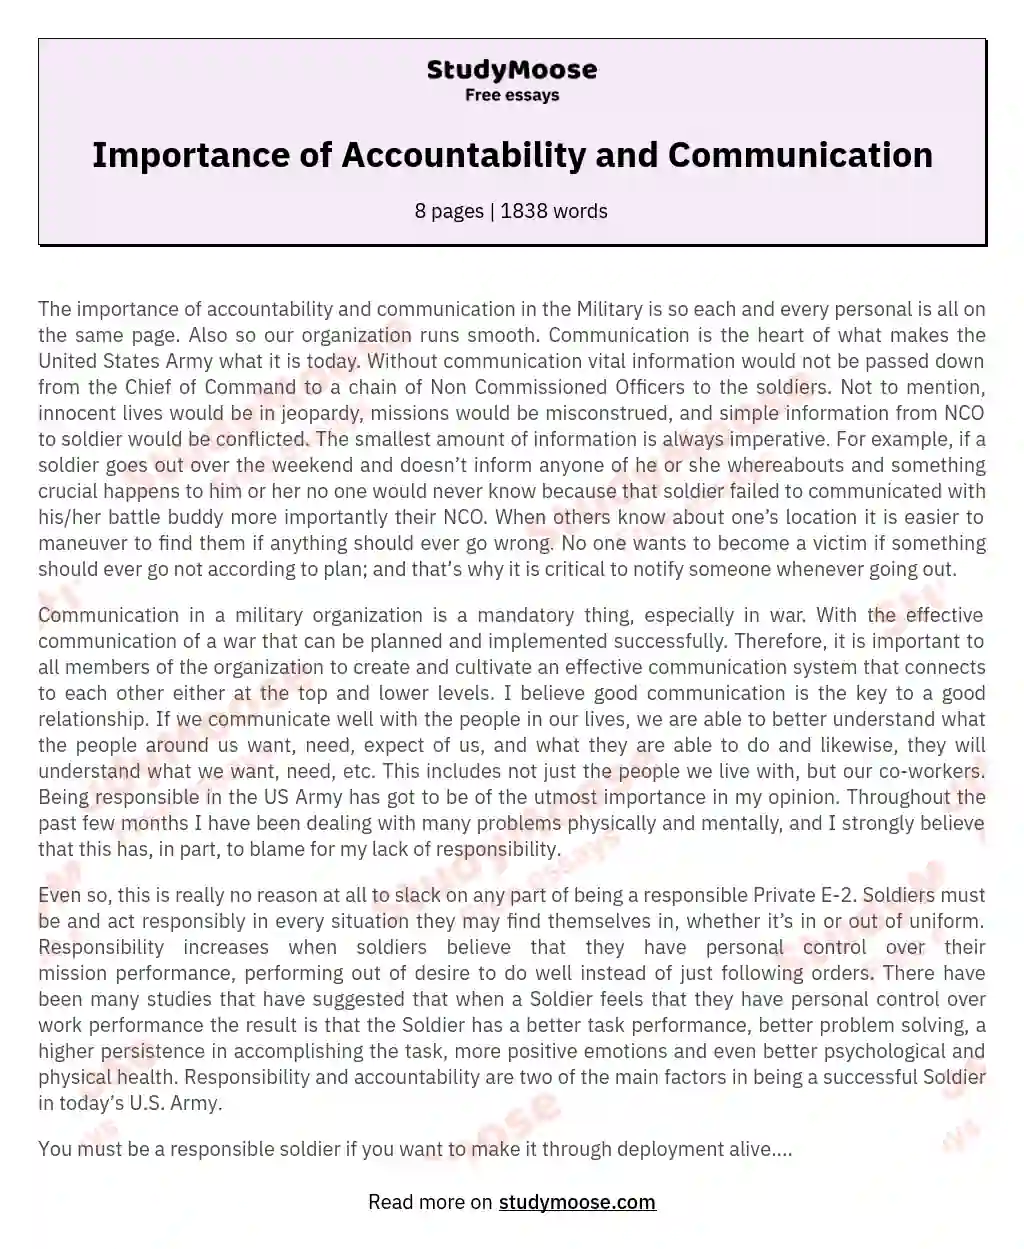 Importance of Accountability and Communication